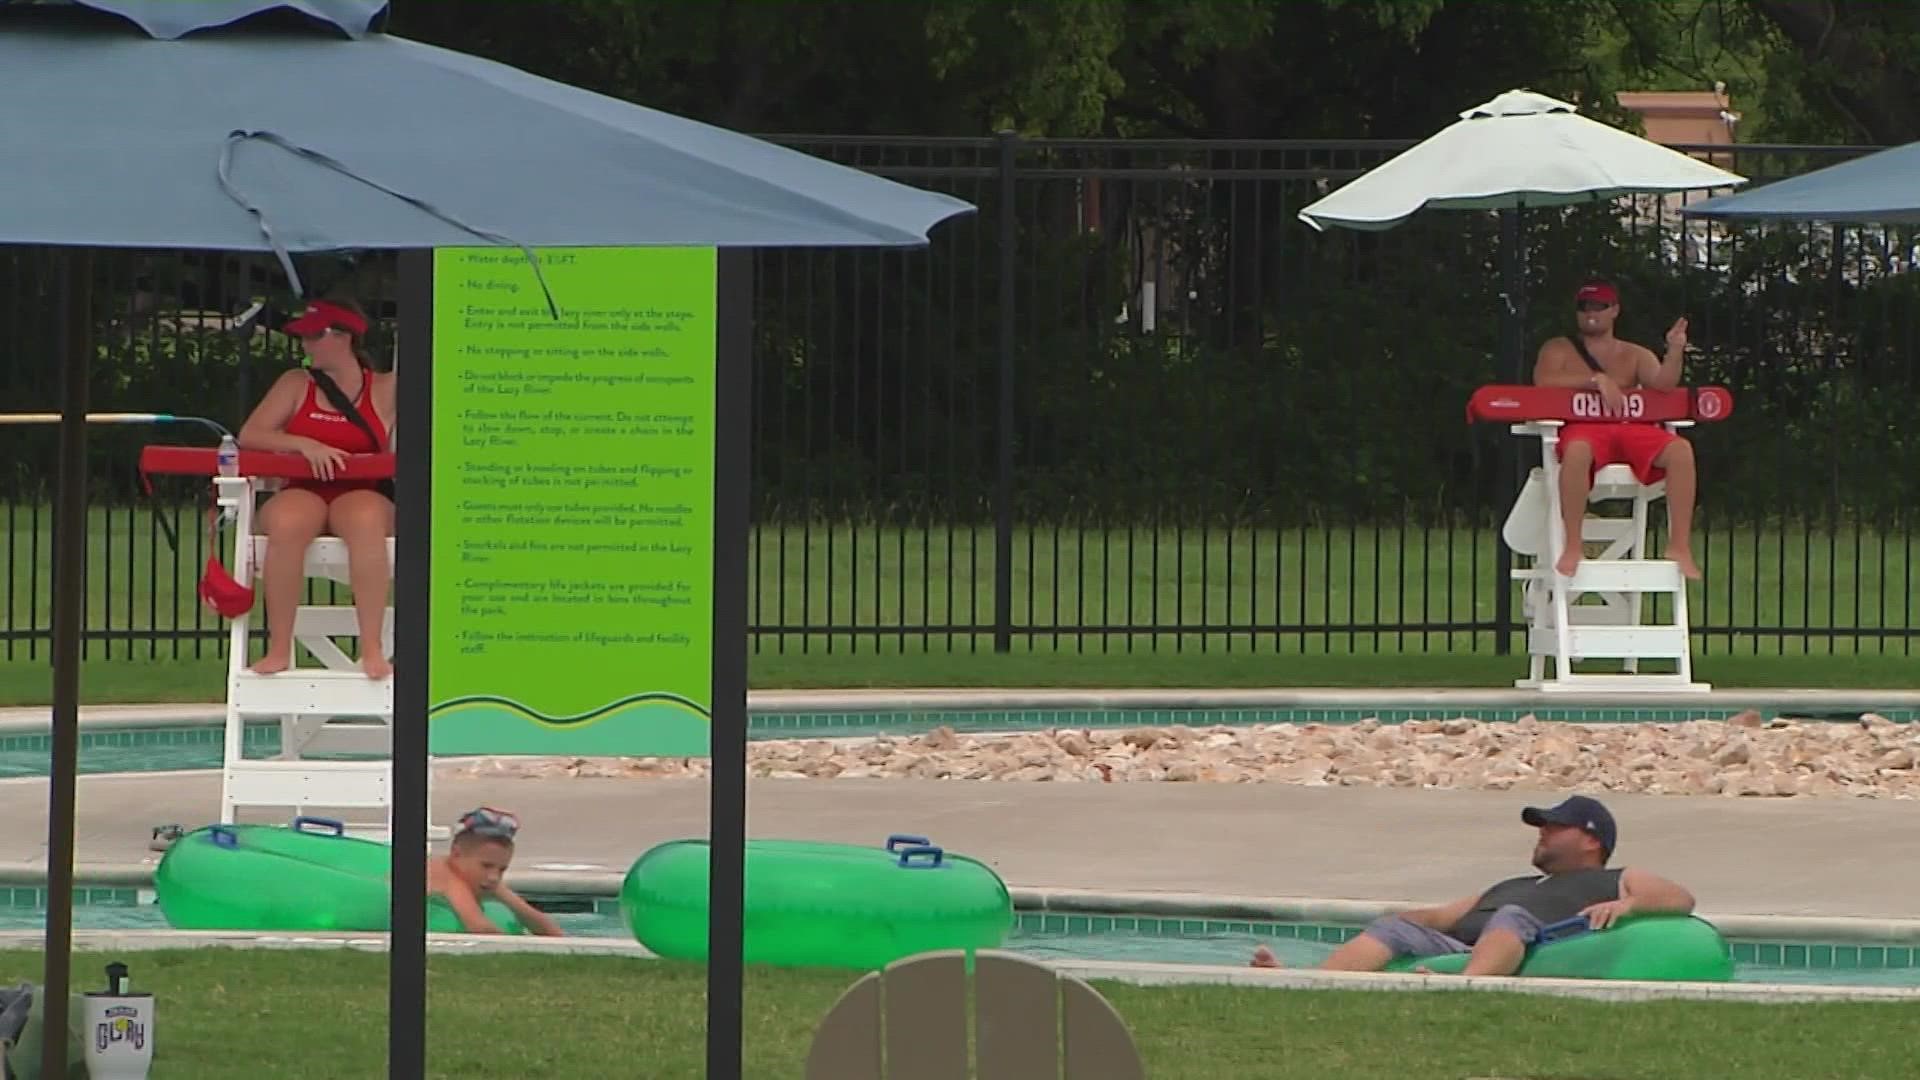 The hiring push is aimed at making sure pool hours aren't limited this summer, due to lack of staffing.